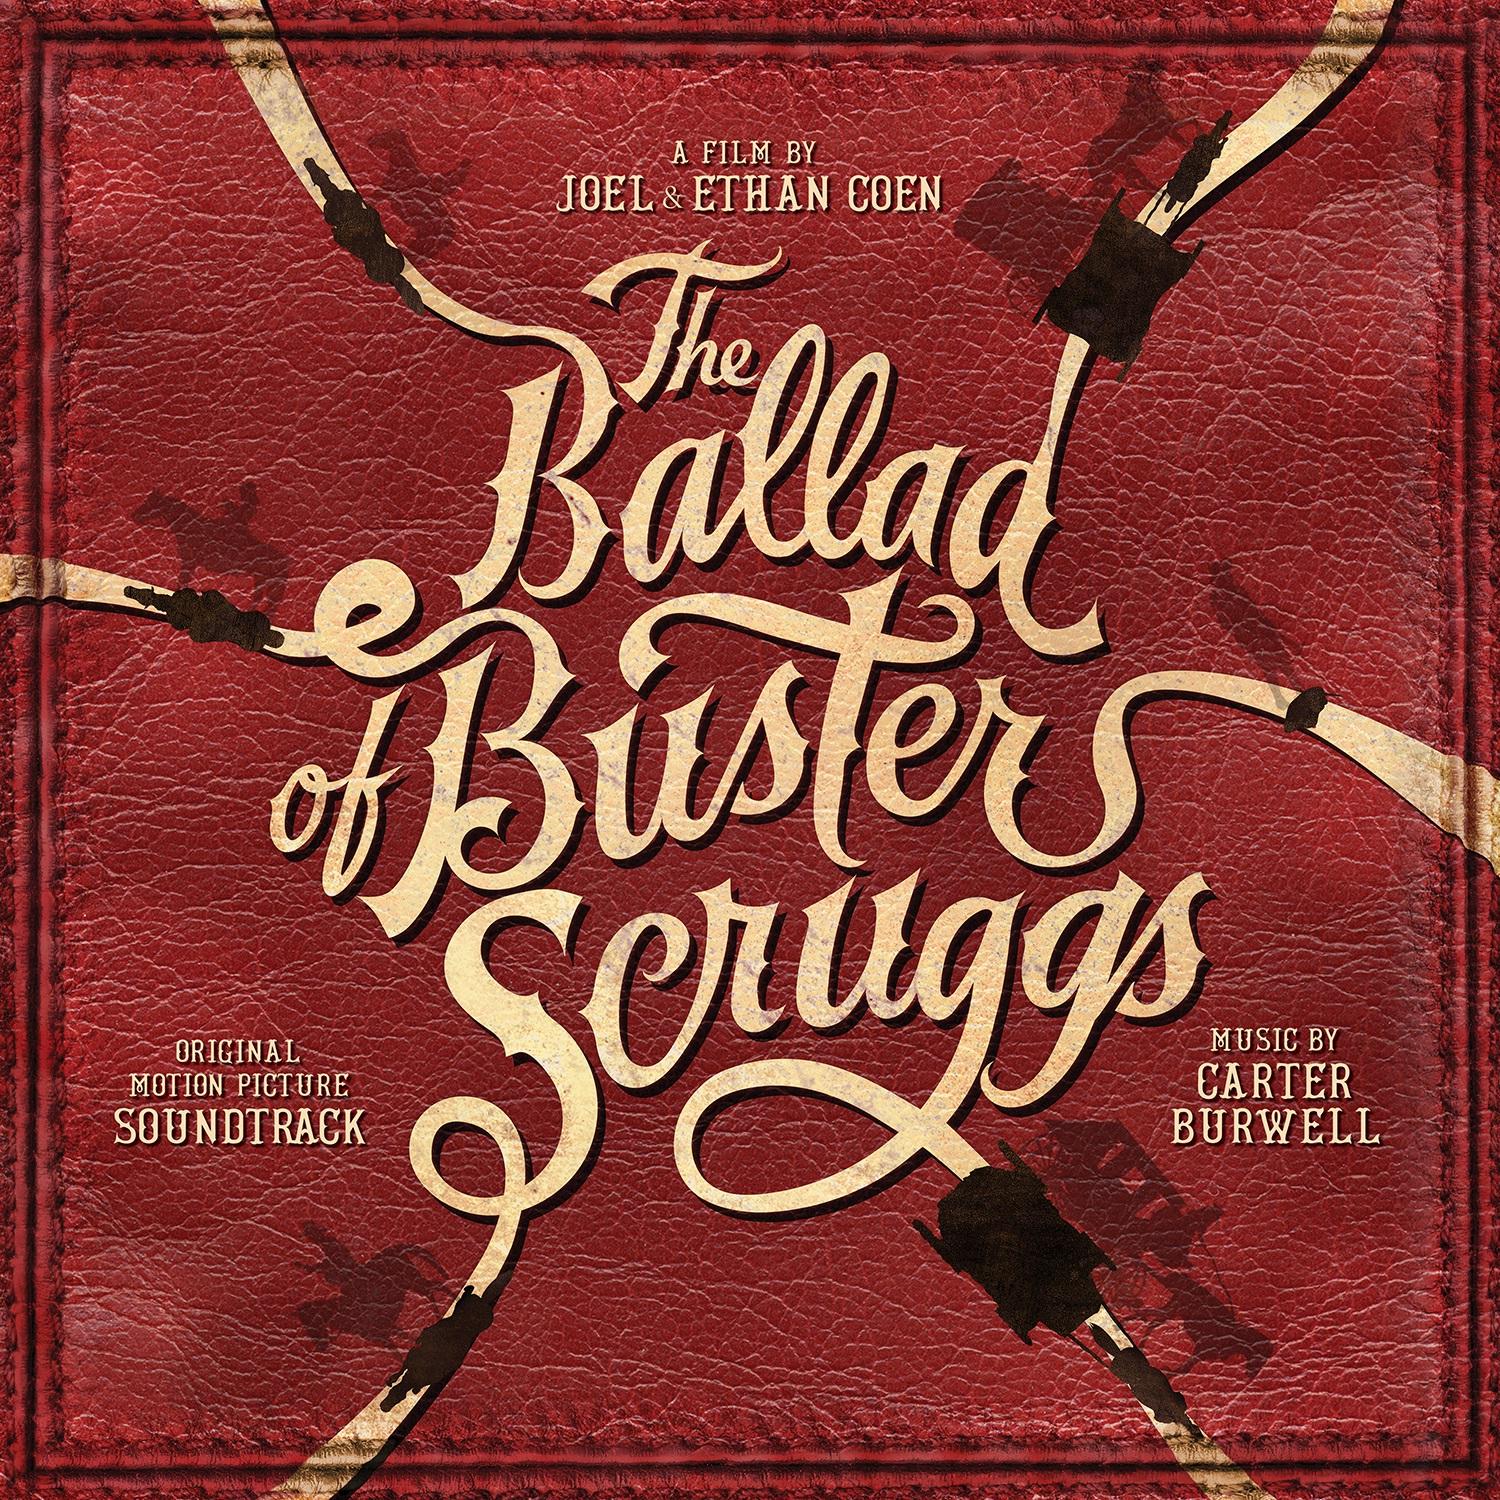 The Ballad of Buster Scruggs (Original Motion Picture Soundtrack)专辑